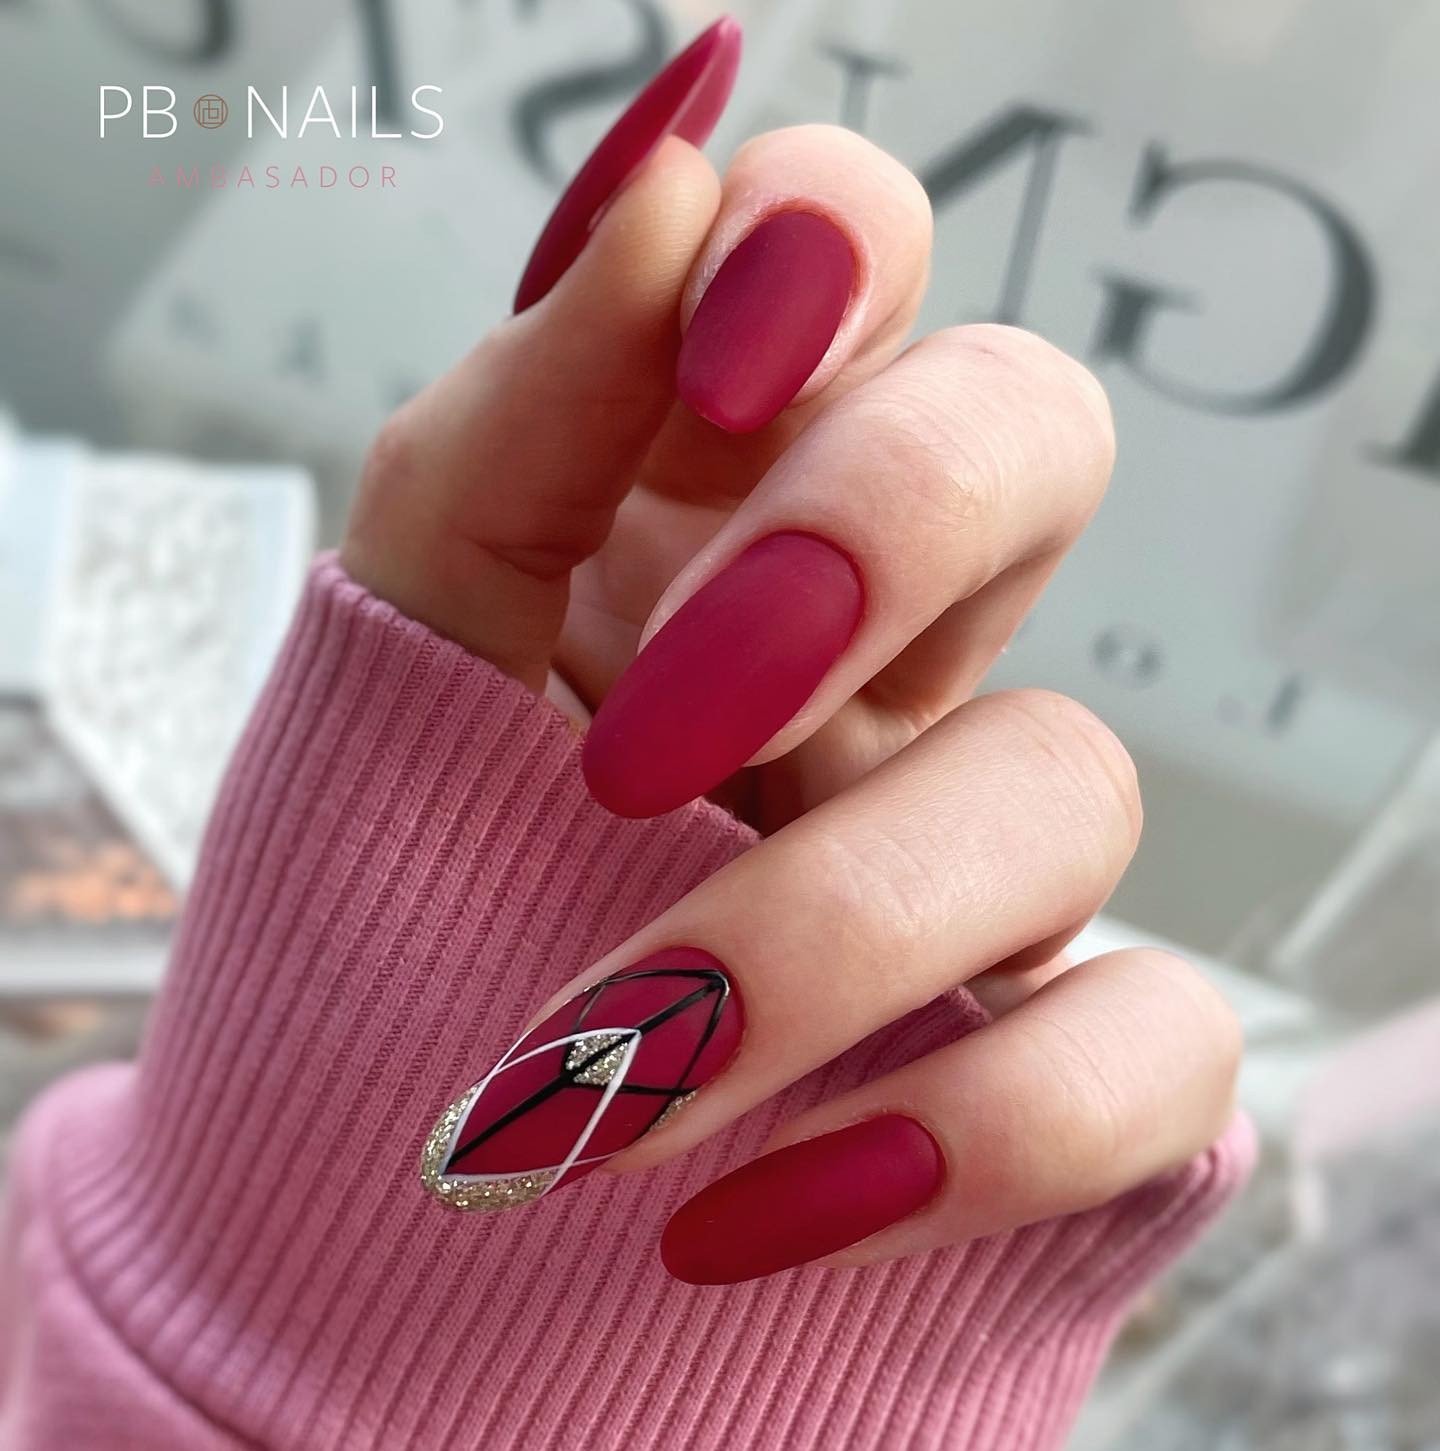 Long Matte Burgundy Nails with Accent Nail Design